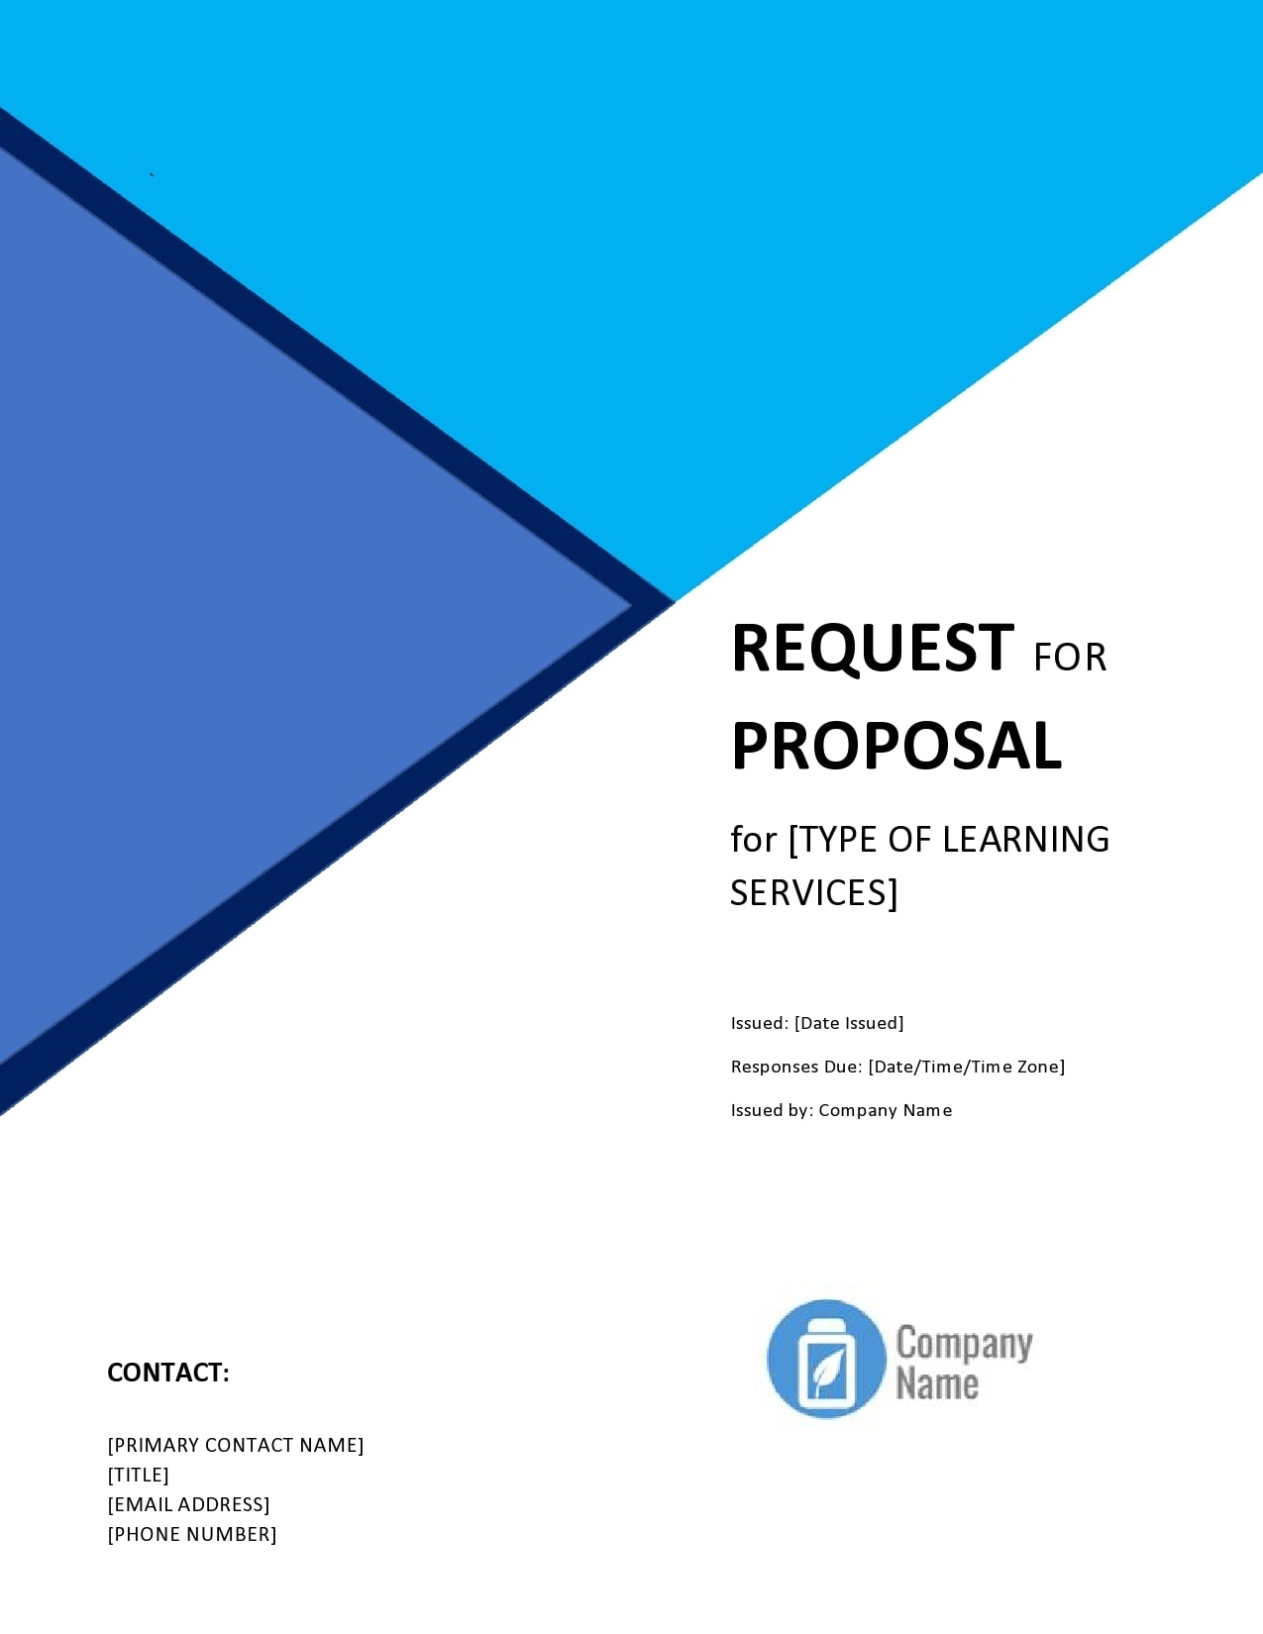 28 Best Request For Proposal Templates (Rfp) - Templatearchive With Request For Proposal Template Word